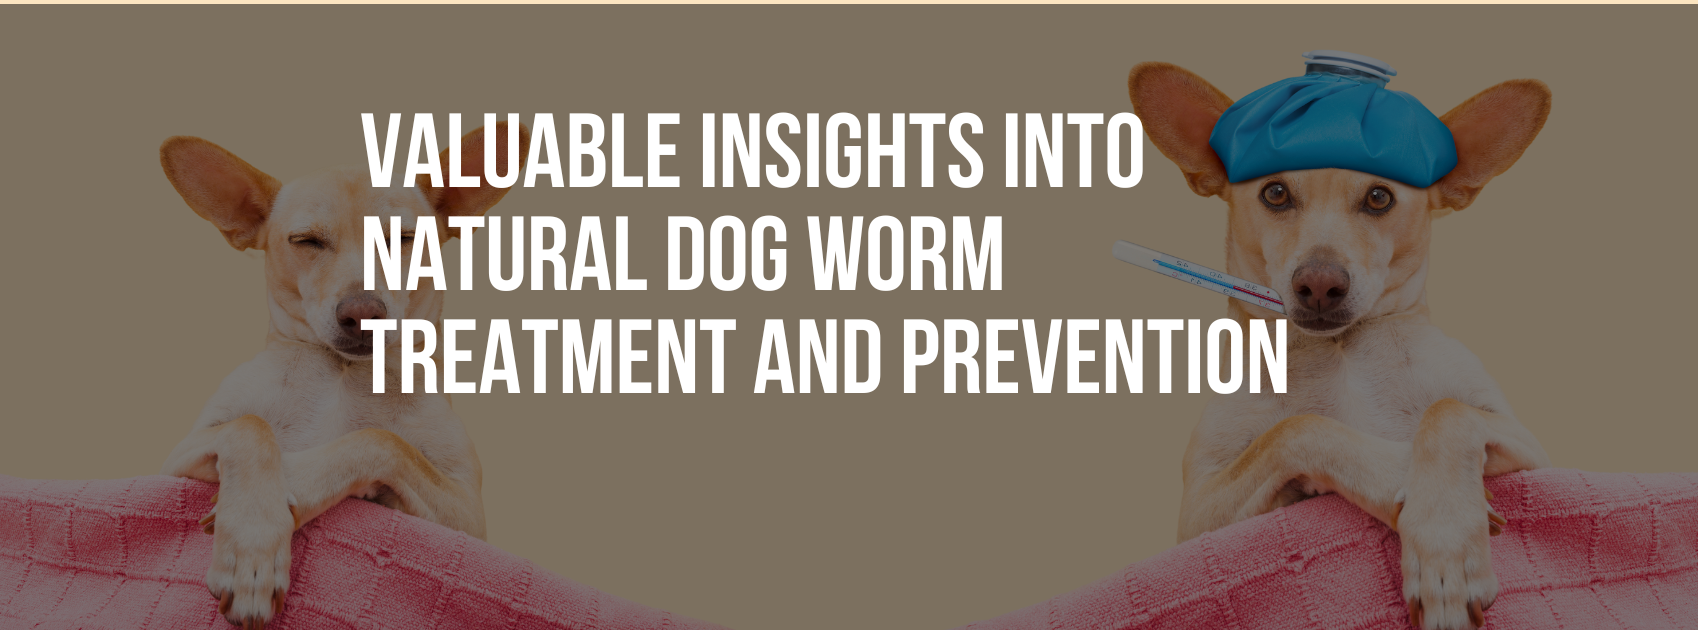 Valuable Insights into Natural Dog Worm Treatment and Prevention